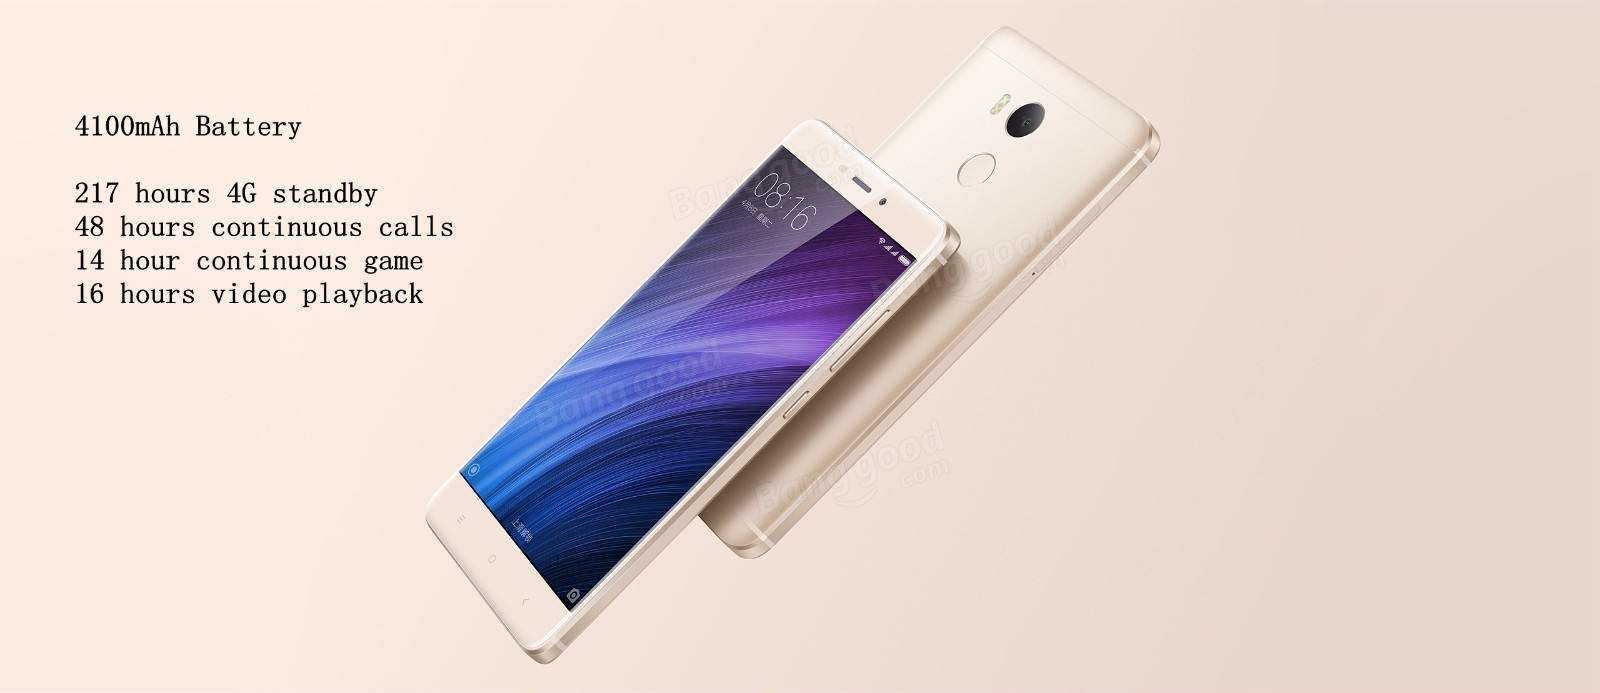 Xiaomi Redmi 4 comes with huge 4100mAh battery power